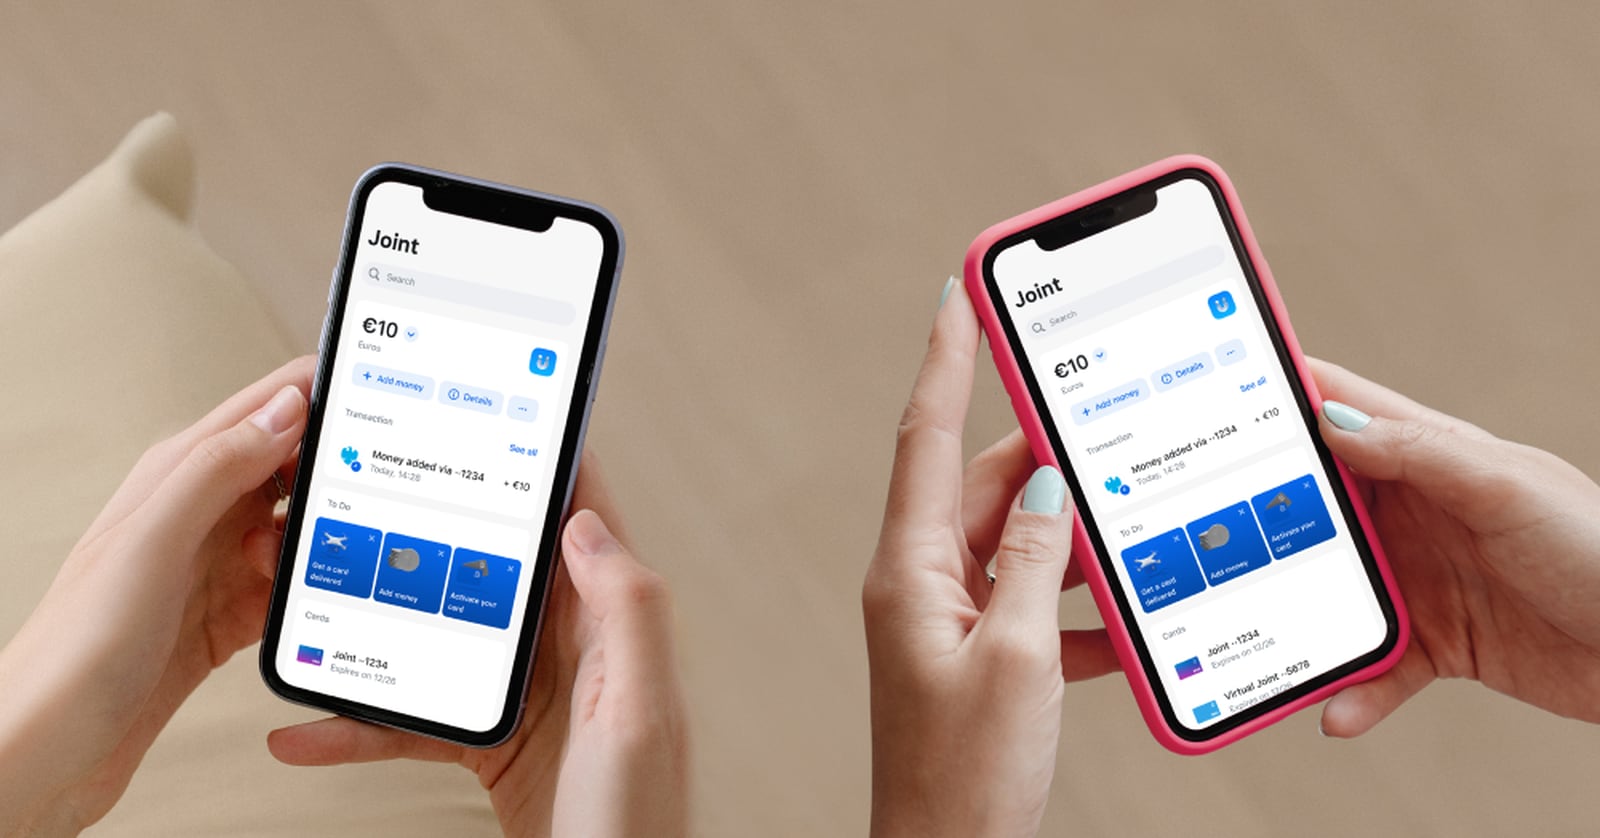 Two smartphones showing the Revolut app open at the joint account screen